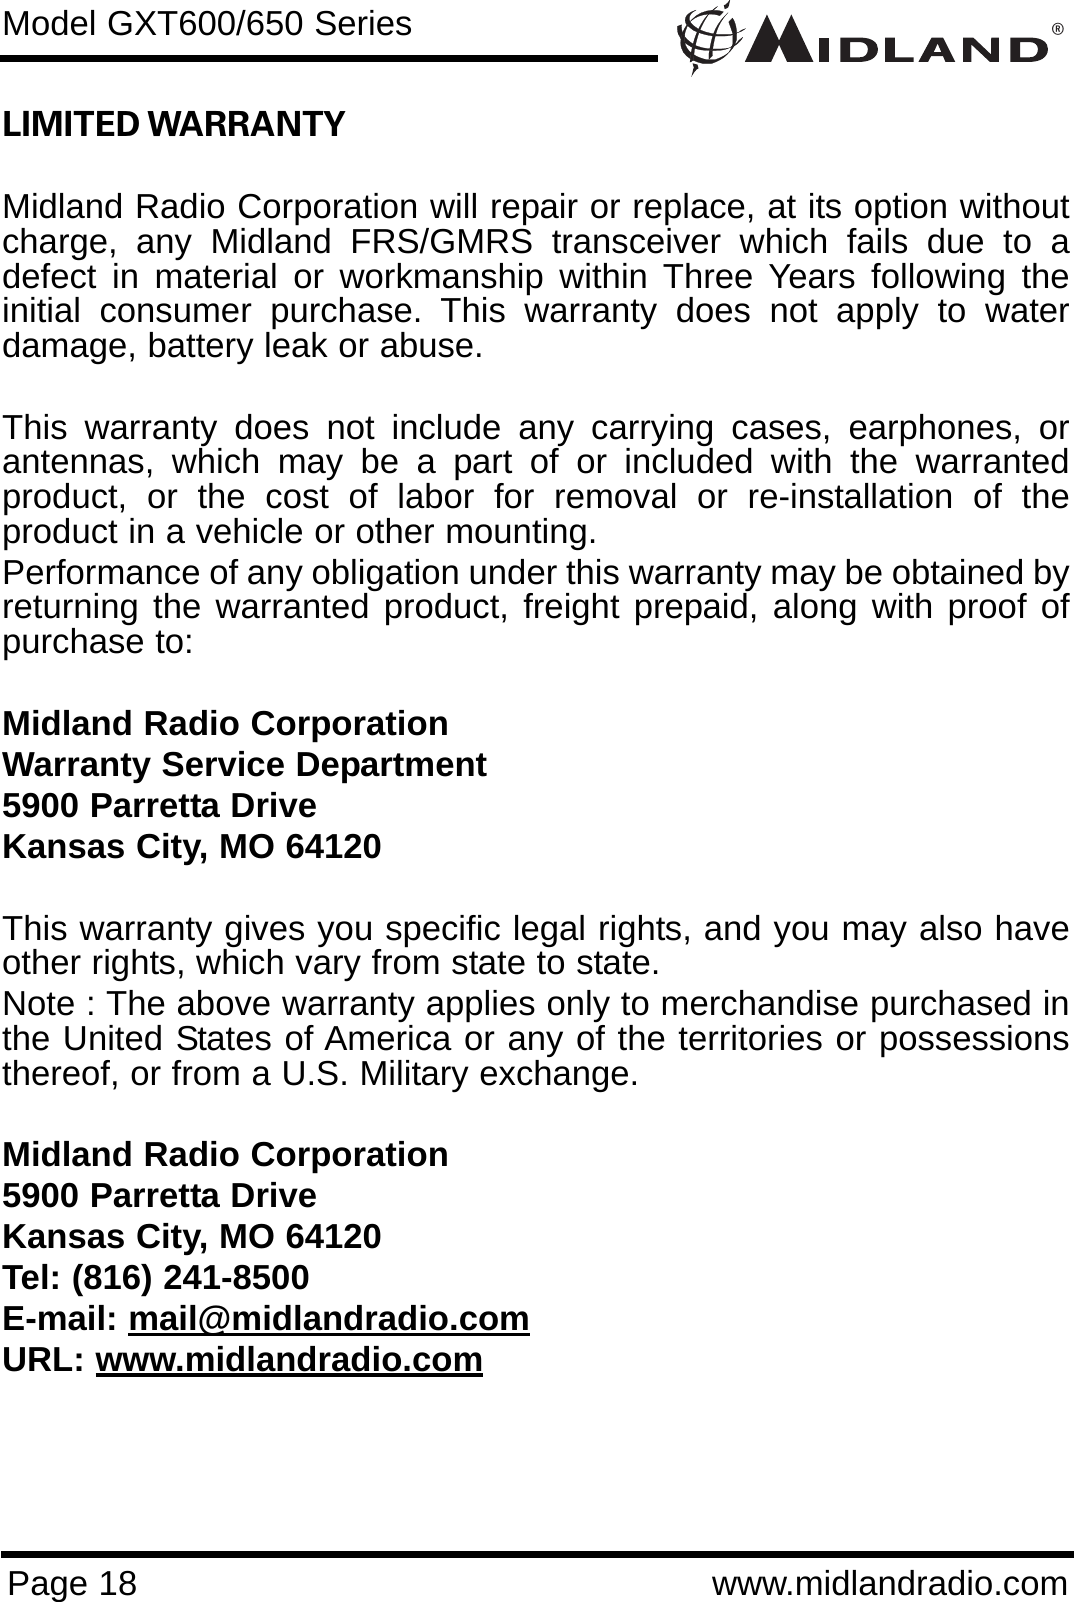 ®Page 18 www.midlandradio.comLIMITED WARRANTY Midland Radio Corporation will repair or replace, at its option withoutcharge, any Midland FRS/GMRS transceiver which fails due to adefect in material or workmanship within Three Years following theinitial consumer purchase. This warranty does not apply to waterdamage, battery leak or abuse.This warranty does not include any carrying cases, earphones, orantennas, which may be a part of or included with the warrantedproduct, or the cost of labor for removal or re-installation of theproduct in a vehicle or other mounting.Performance of any obligation under this warranty may be obtained byreturning the warranted product, freight prepaid, along with proof ofpurchase to:Midland Radio CorporationWarranty Service Department5900 Parretta DriveKansas City, MO 64120This warranty gives you specific legal rights, and you may also haveother rights, which vary from state to state.Note : The above warranty applies only to merchandise purchased inthe United States of America or any of the territories or possessionsthereof, or from a U.S. Military exchange.Midland Radio Corporation5900 Parretta DriveKansas City, MO 64120Tel: (816) 241-8500E-mail: mail@midlandradio.comURL: www.midlandradio.comModel GXT600/650 Series